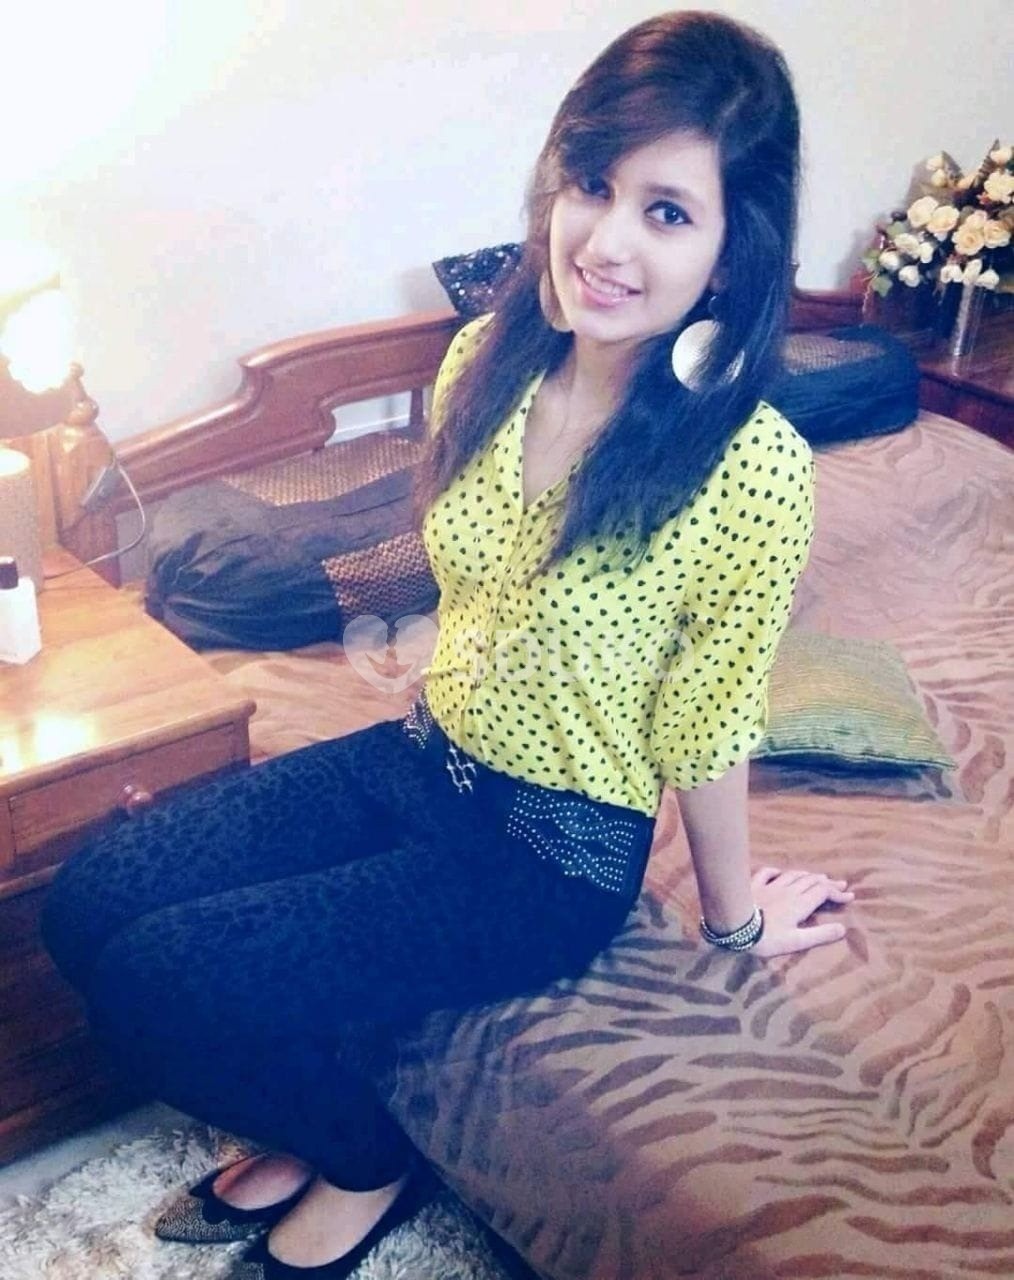 Call girl in Pune self and secure high profile girl available.,.,